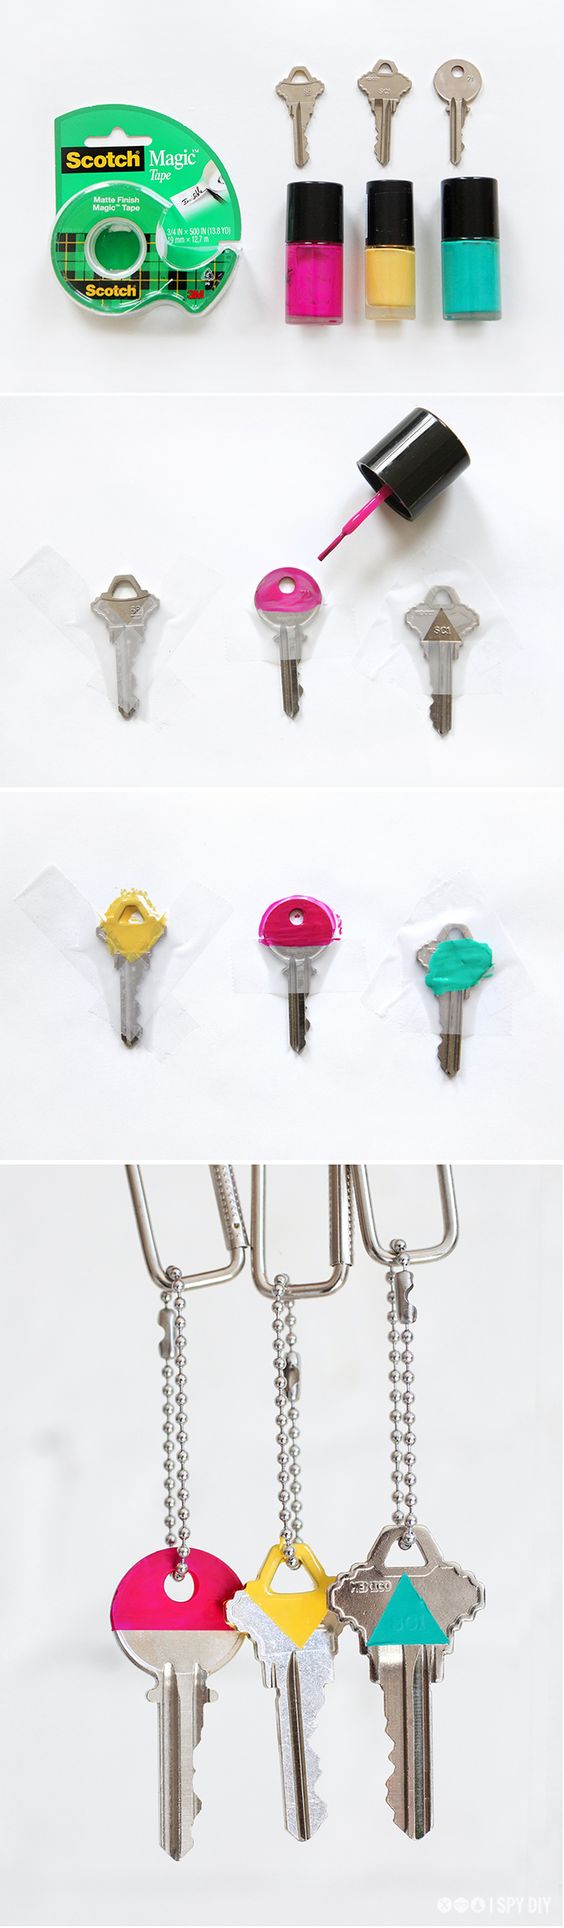 Differentiate your keys by painting them with nail polish